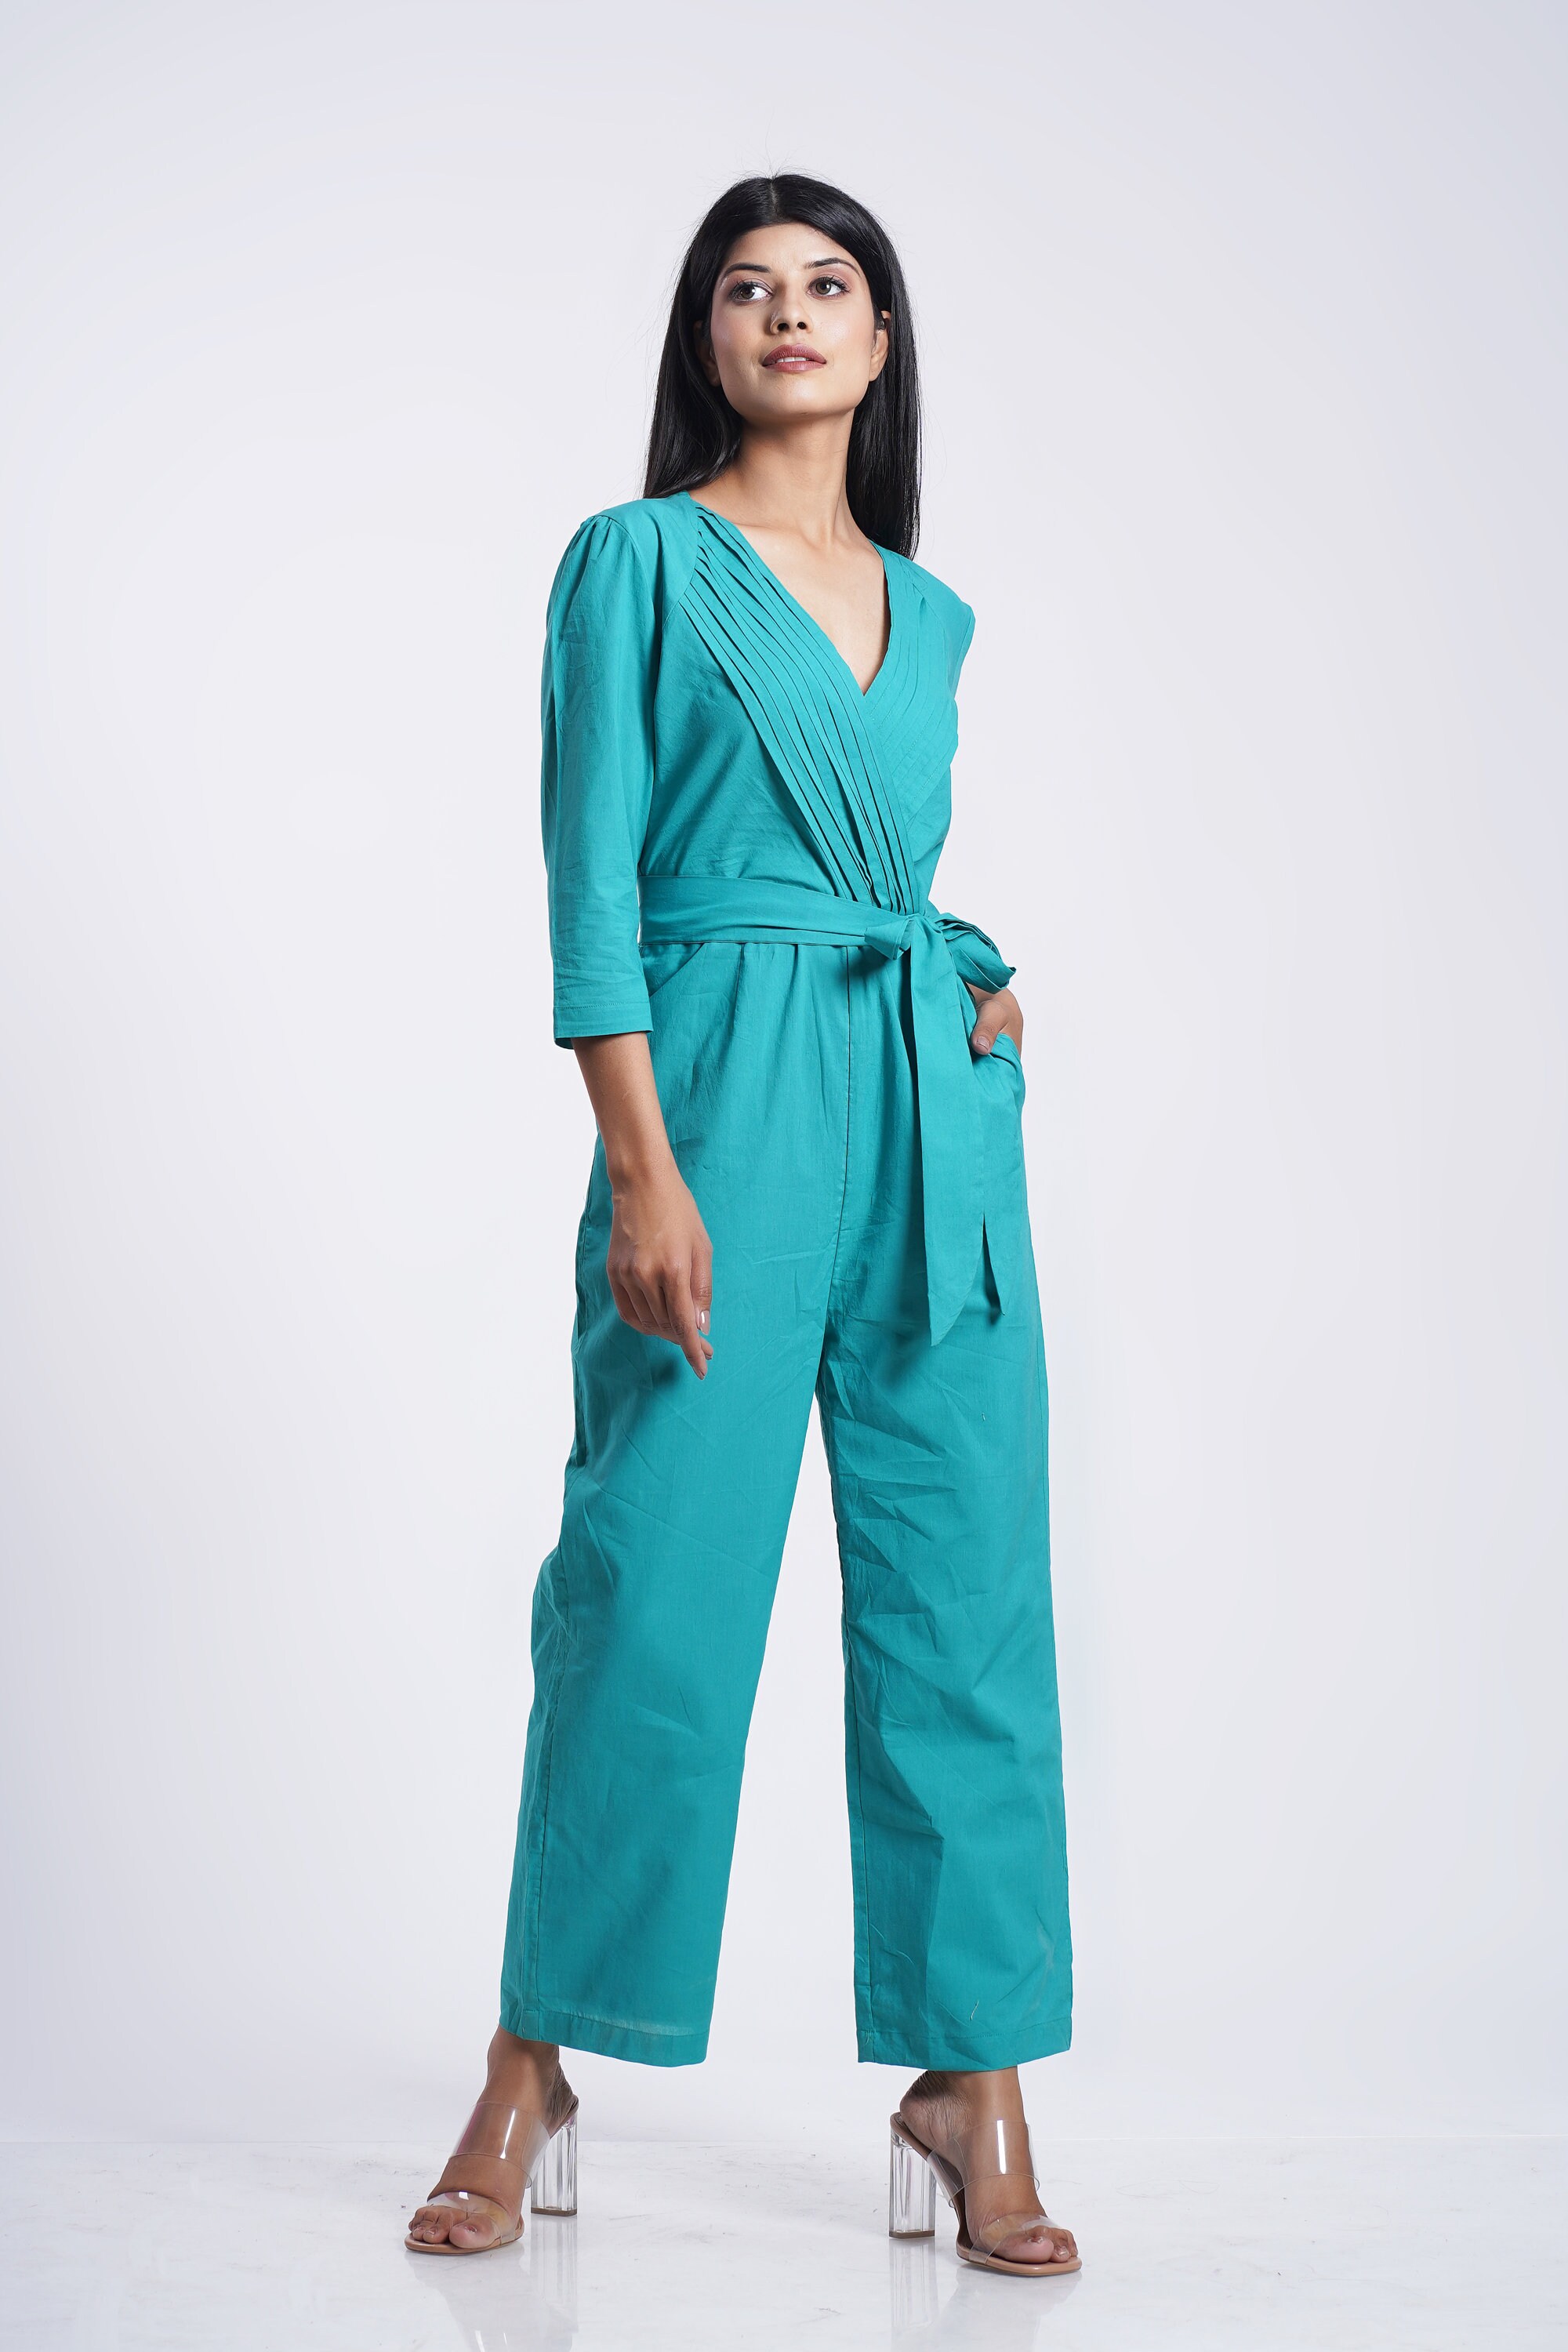 Pleated Wrap V-Neck Turquoise Green Jumpsuit | Etsy